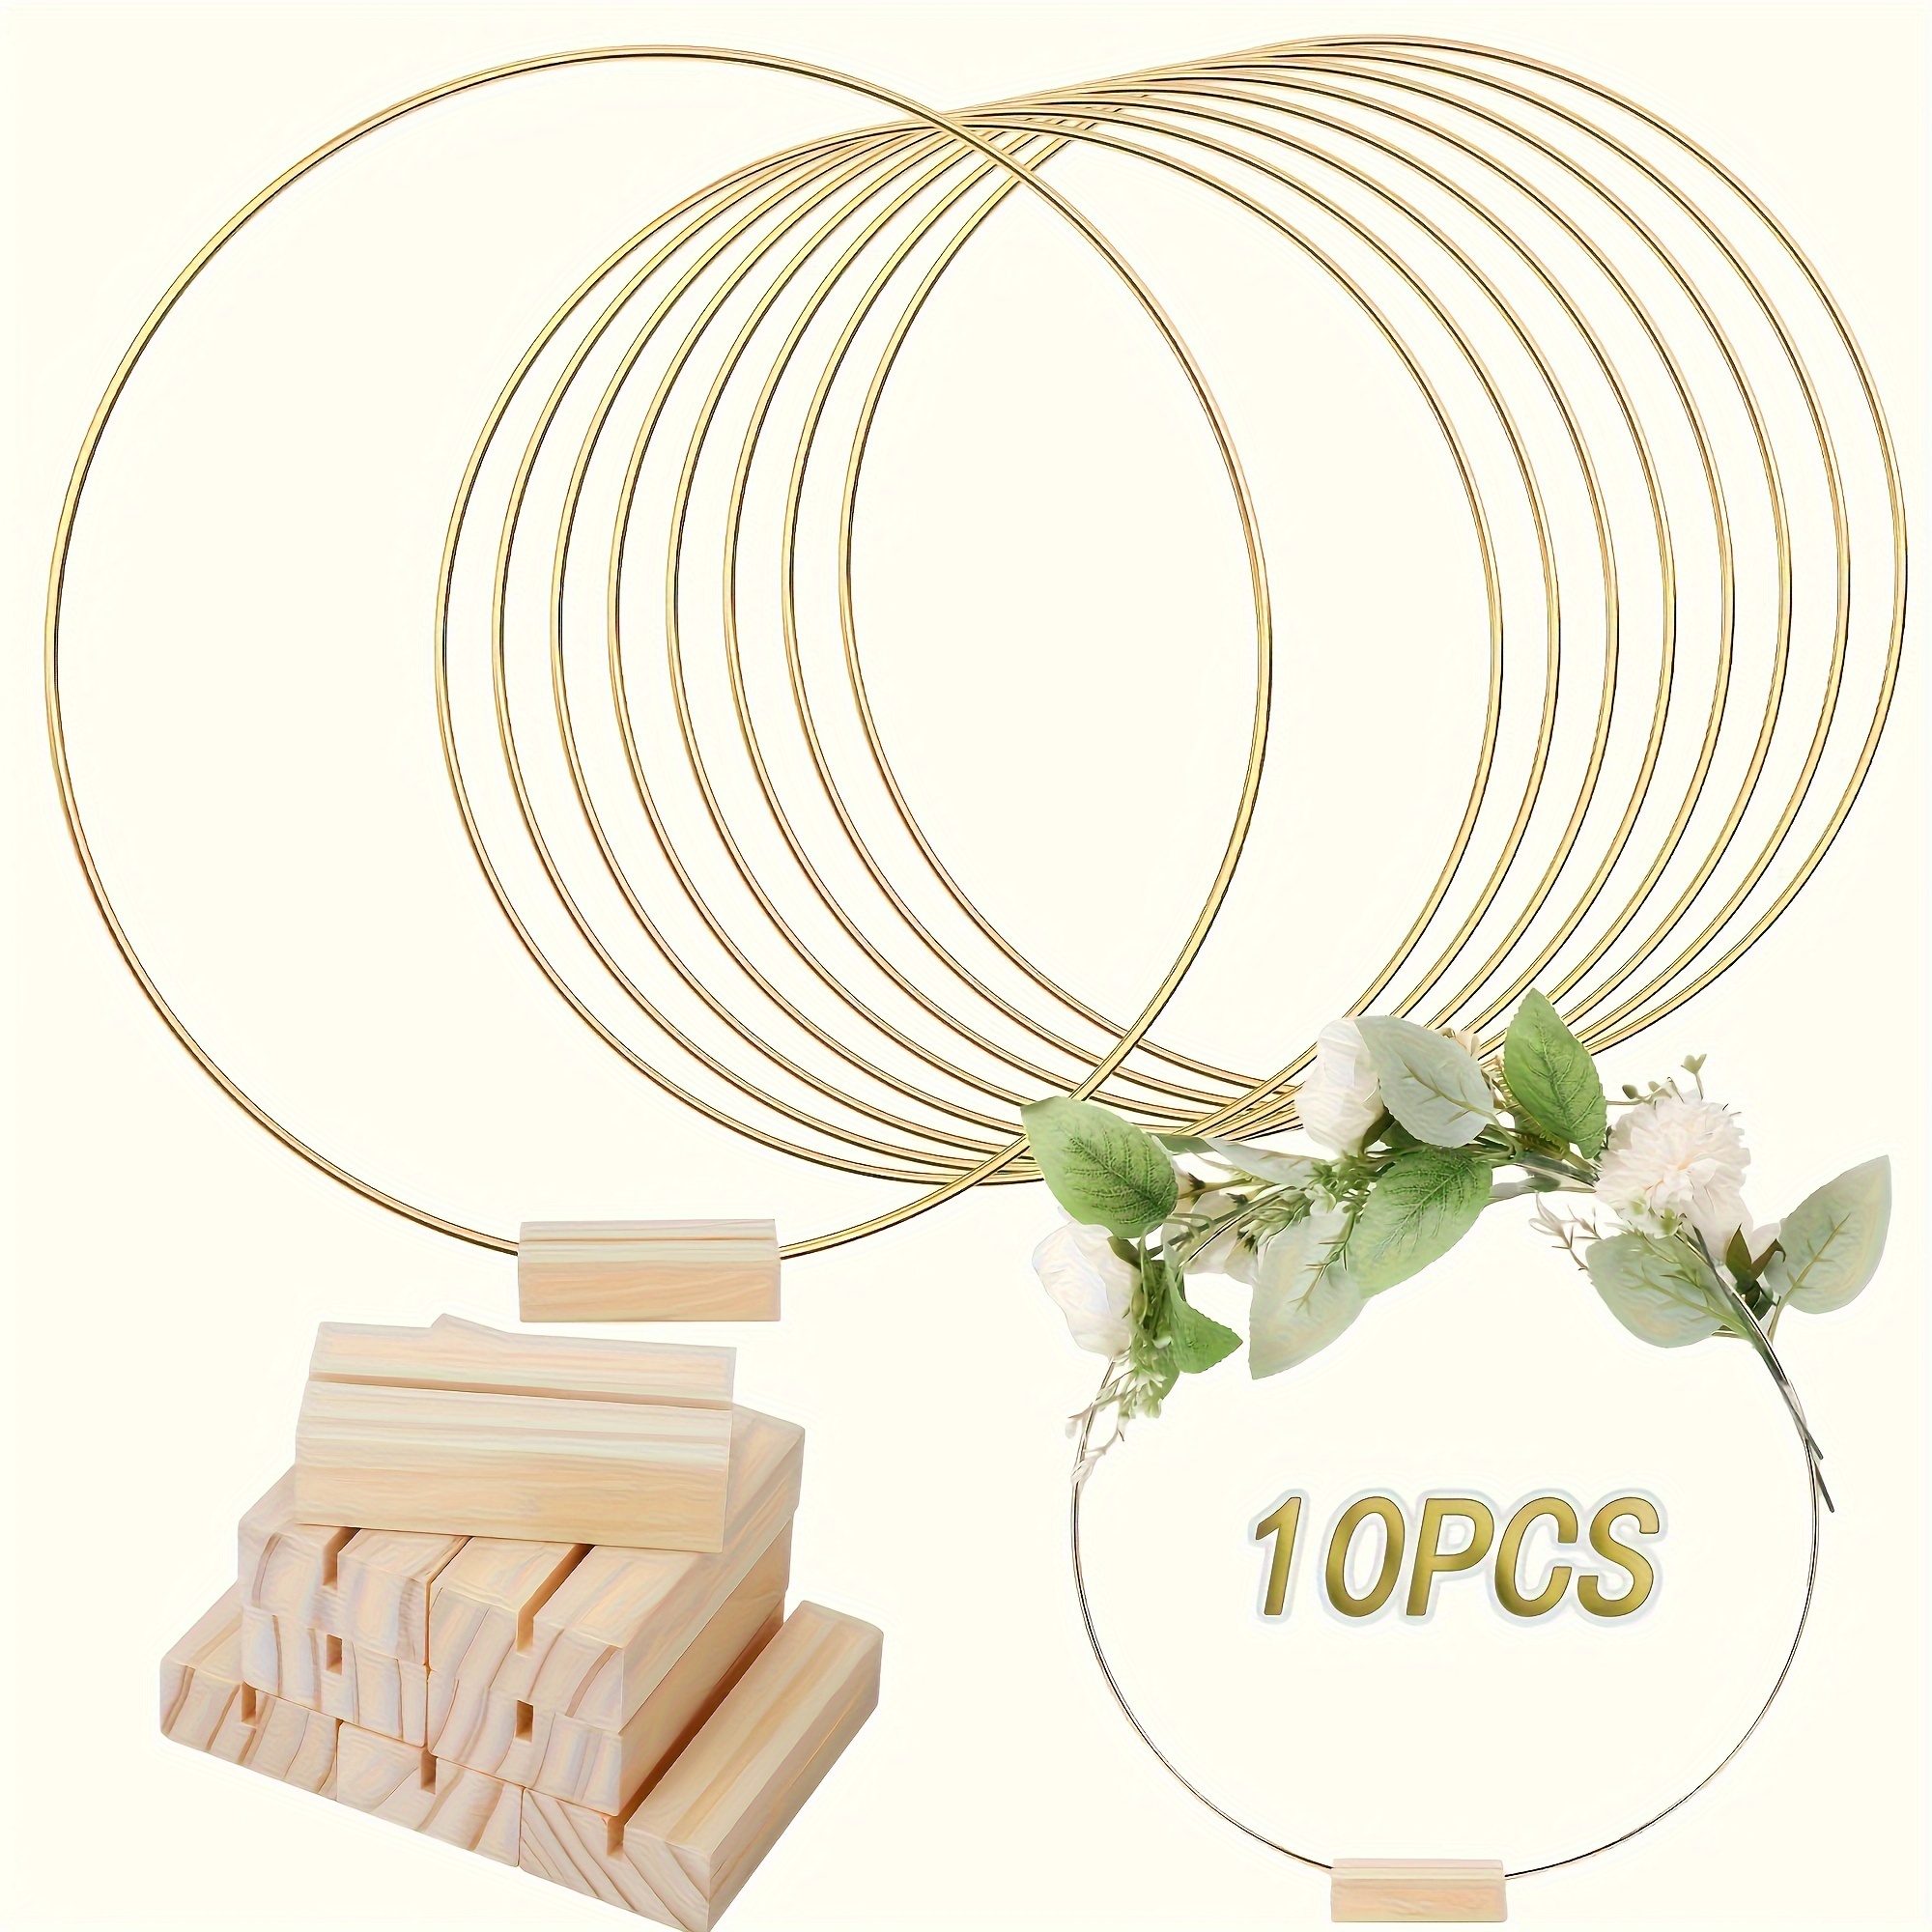 

10pcs Elegant Metal Floral Hoop Centerpieces With Place Card Holders - Ideal For Weddings, Anniversaries & Celebrations Wedding Centerpieces For Tables Floral Centerpieces For Tables